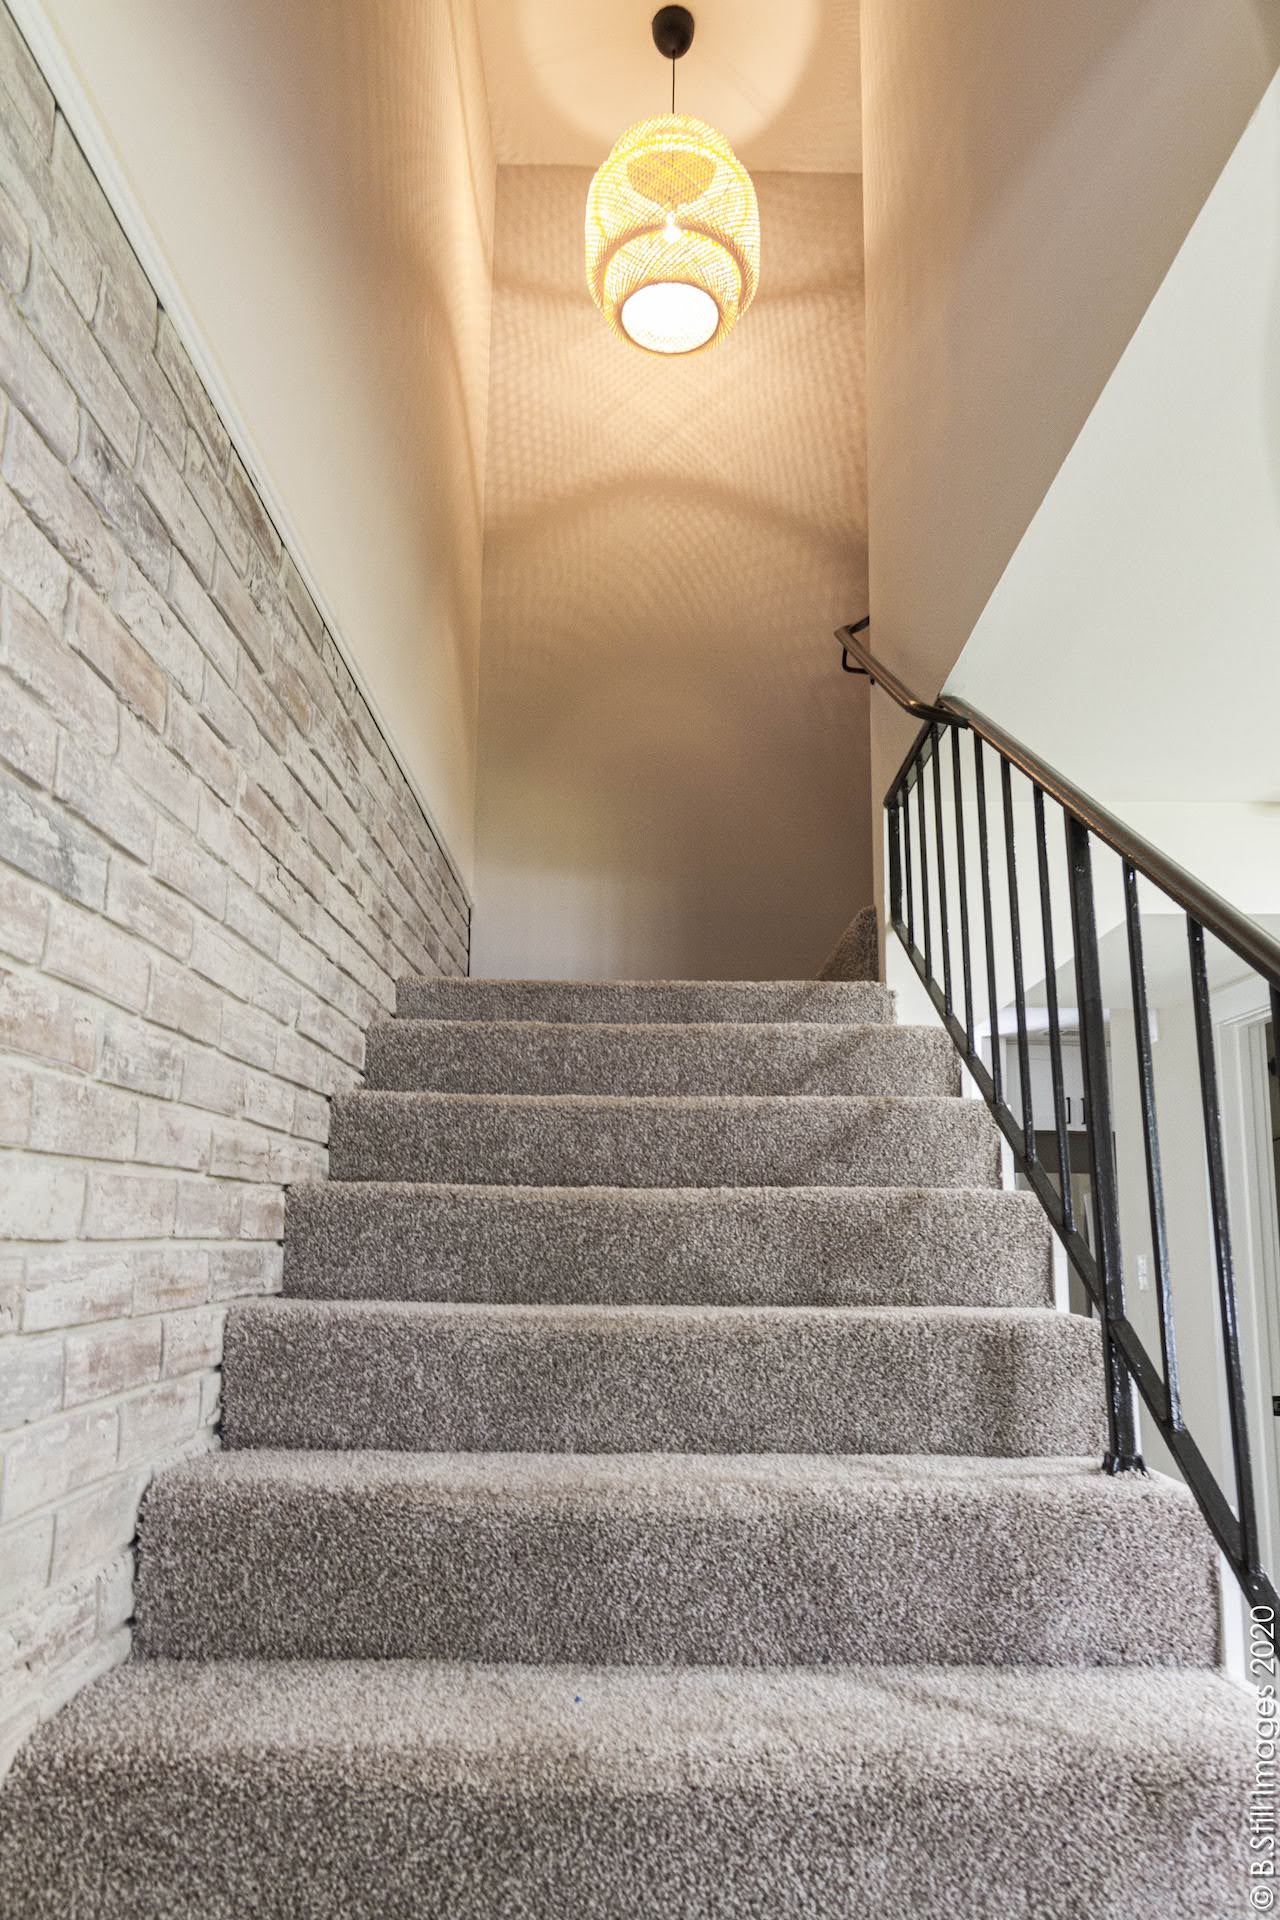 Stairs with a lamp on top